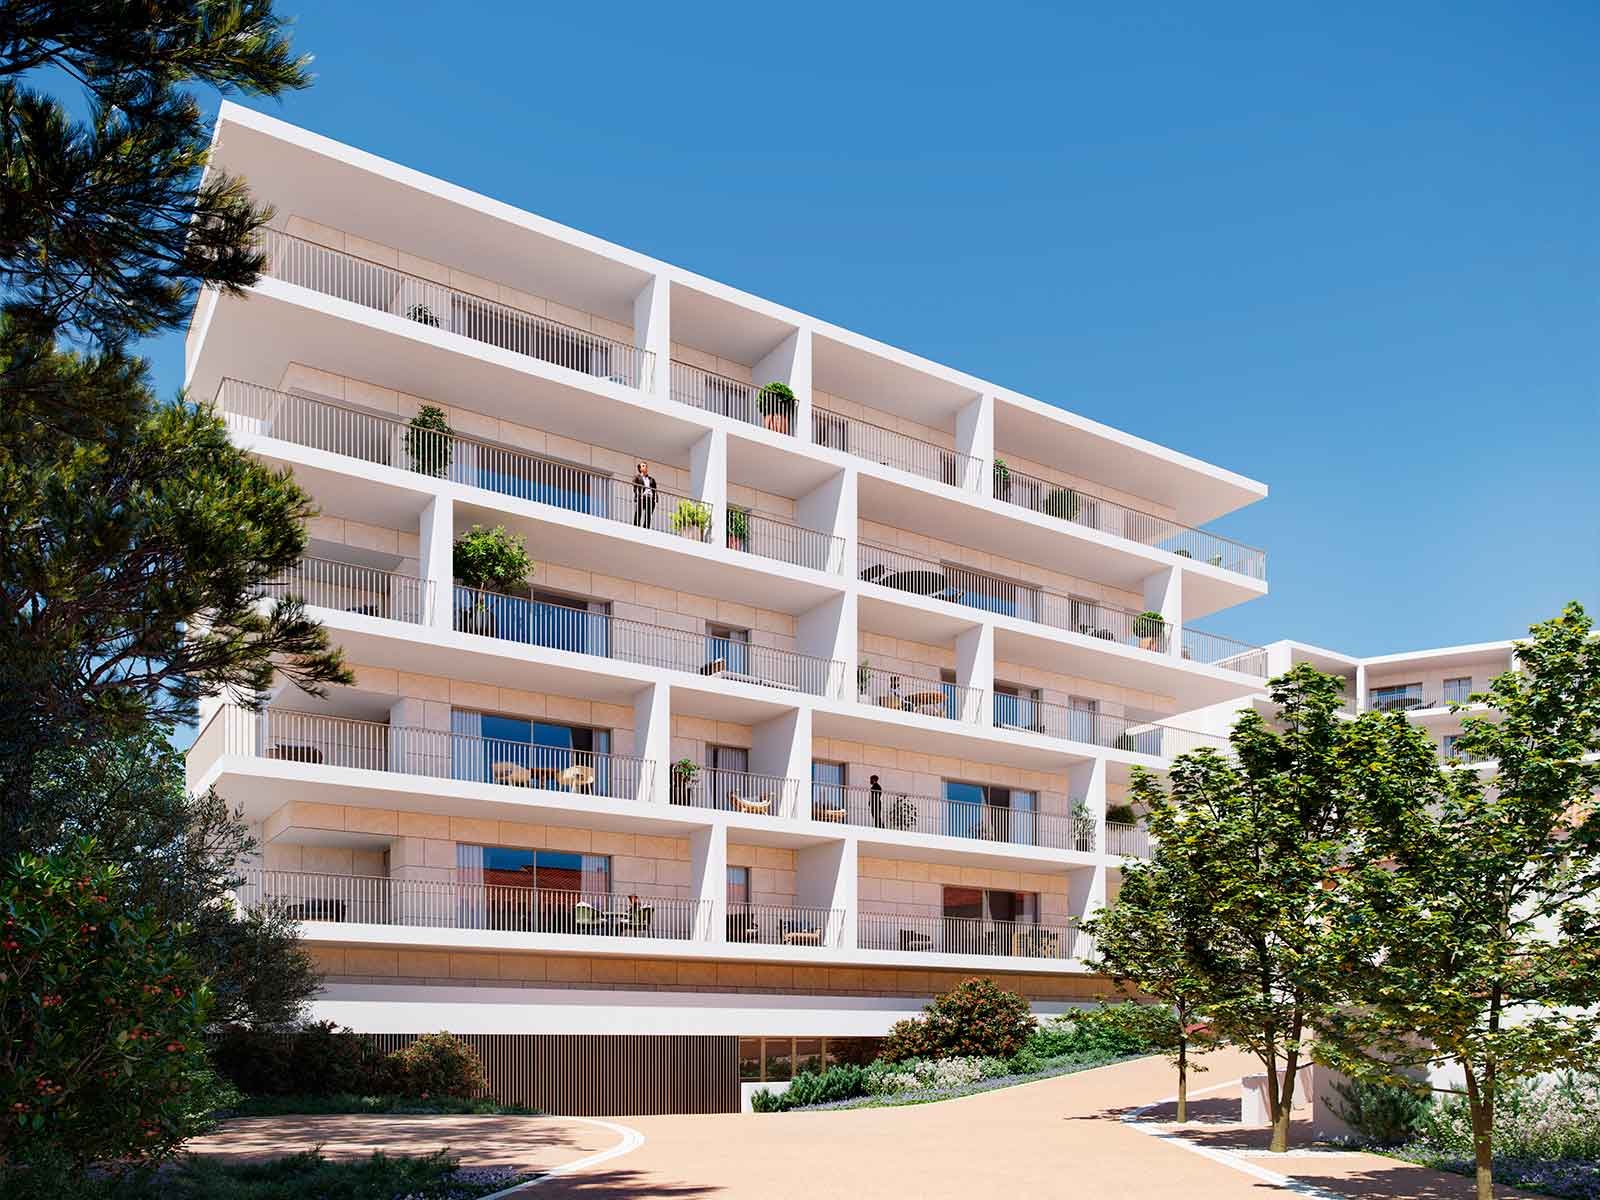 3 bedroom apartment with balcony and parking in new development, Lisbon 3258831438